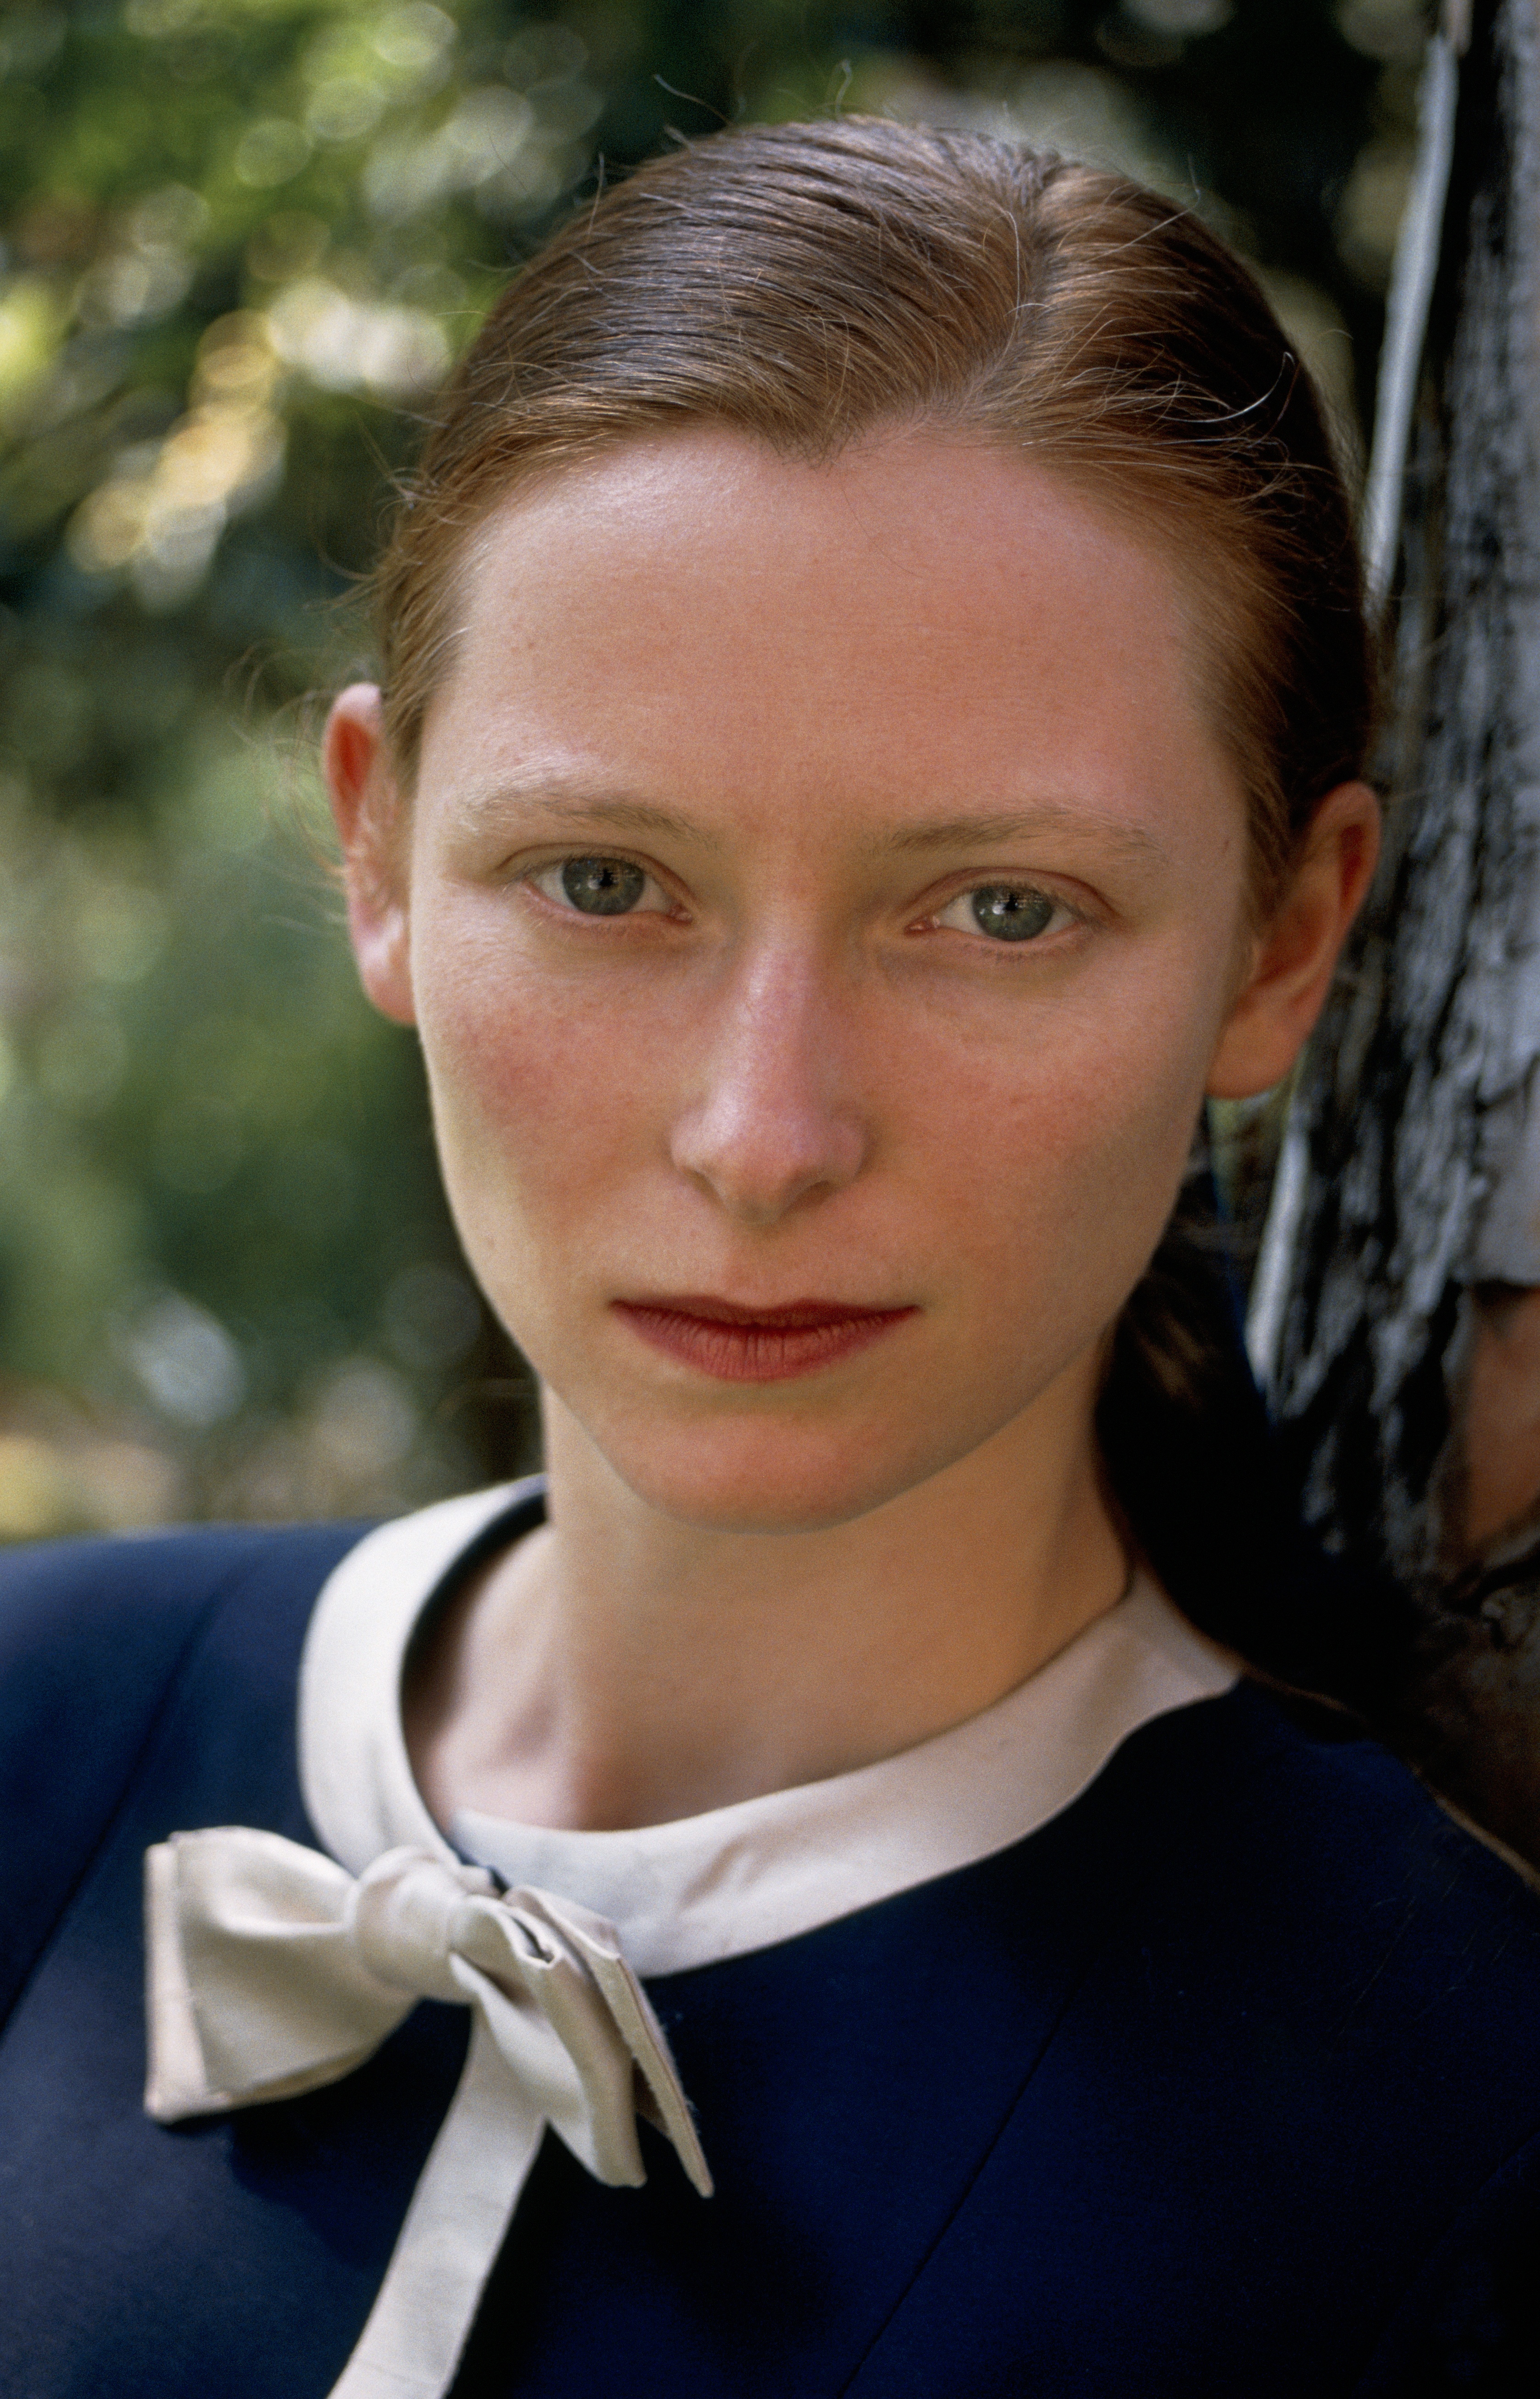 Tilda Swinton at the Cannes Film Festival on October 5, 1990 | Source: Getty Images